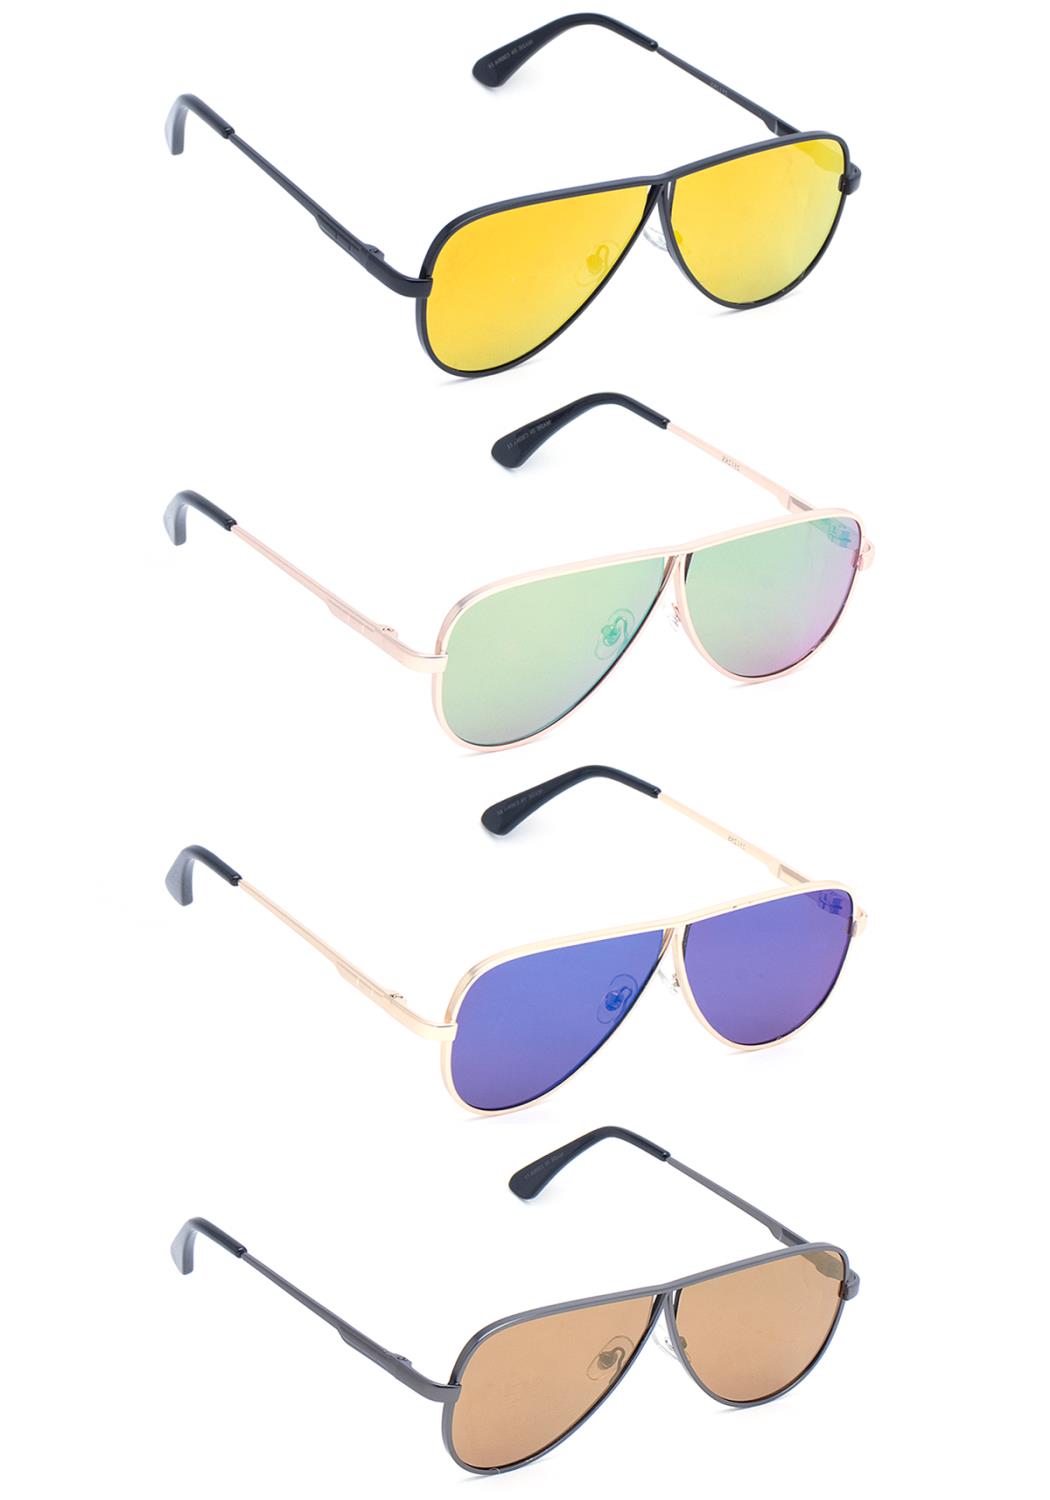 - Modern Aviators Shape Sunglasses - Ships from The US - Sunglasses at TFC&H Co.